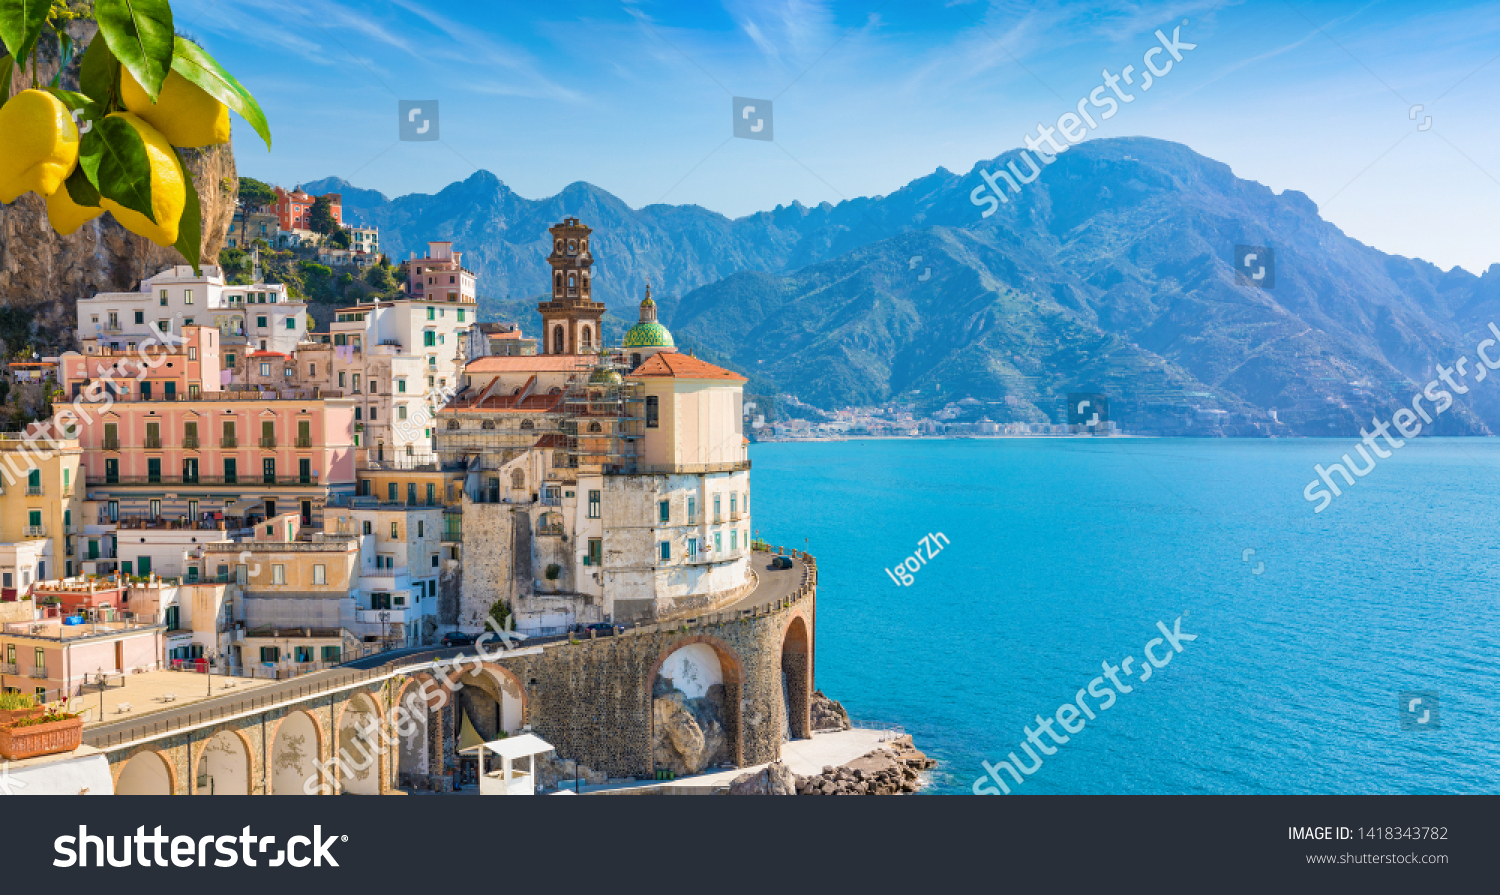 Small town Atrani on Amalfi Coast in province of Salerno, Campania region, Italy. Amalfi coast is popular travel and holyday destination in Italy. Ripe yellow lemons in foreground. #1418343782